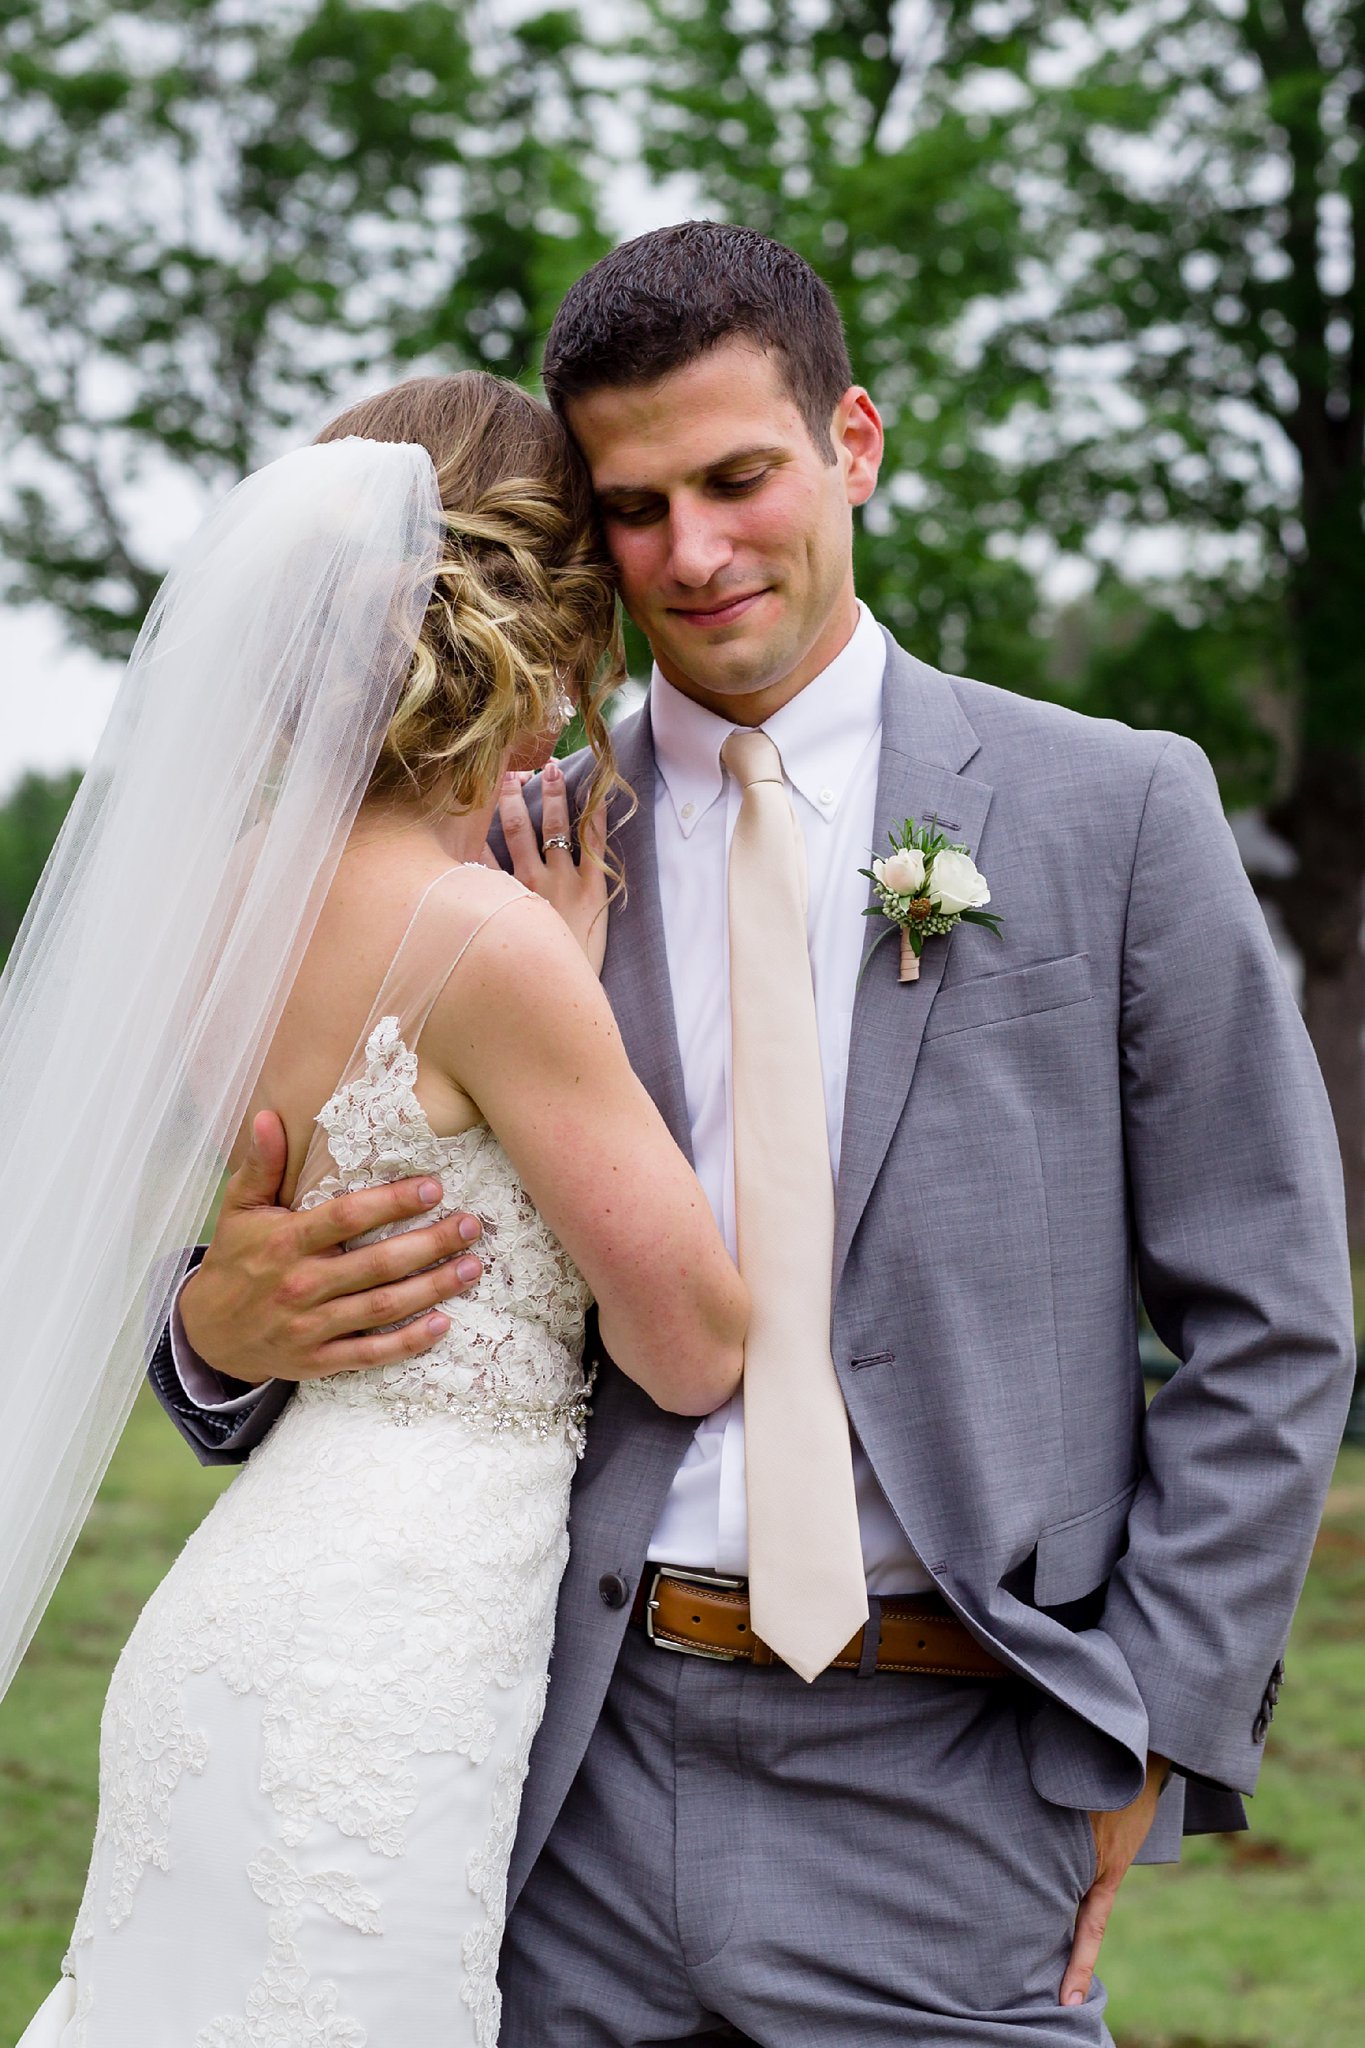 The bride and the groom cuddle in close for wedding portraits